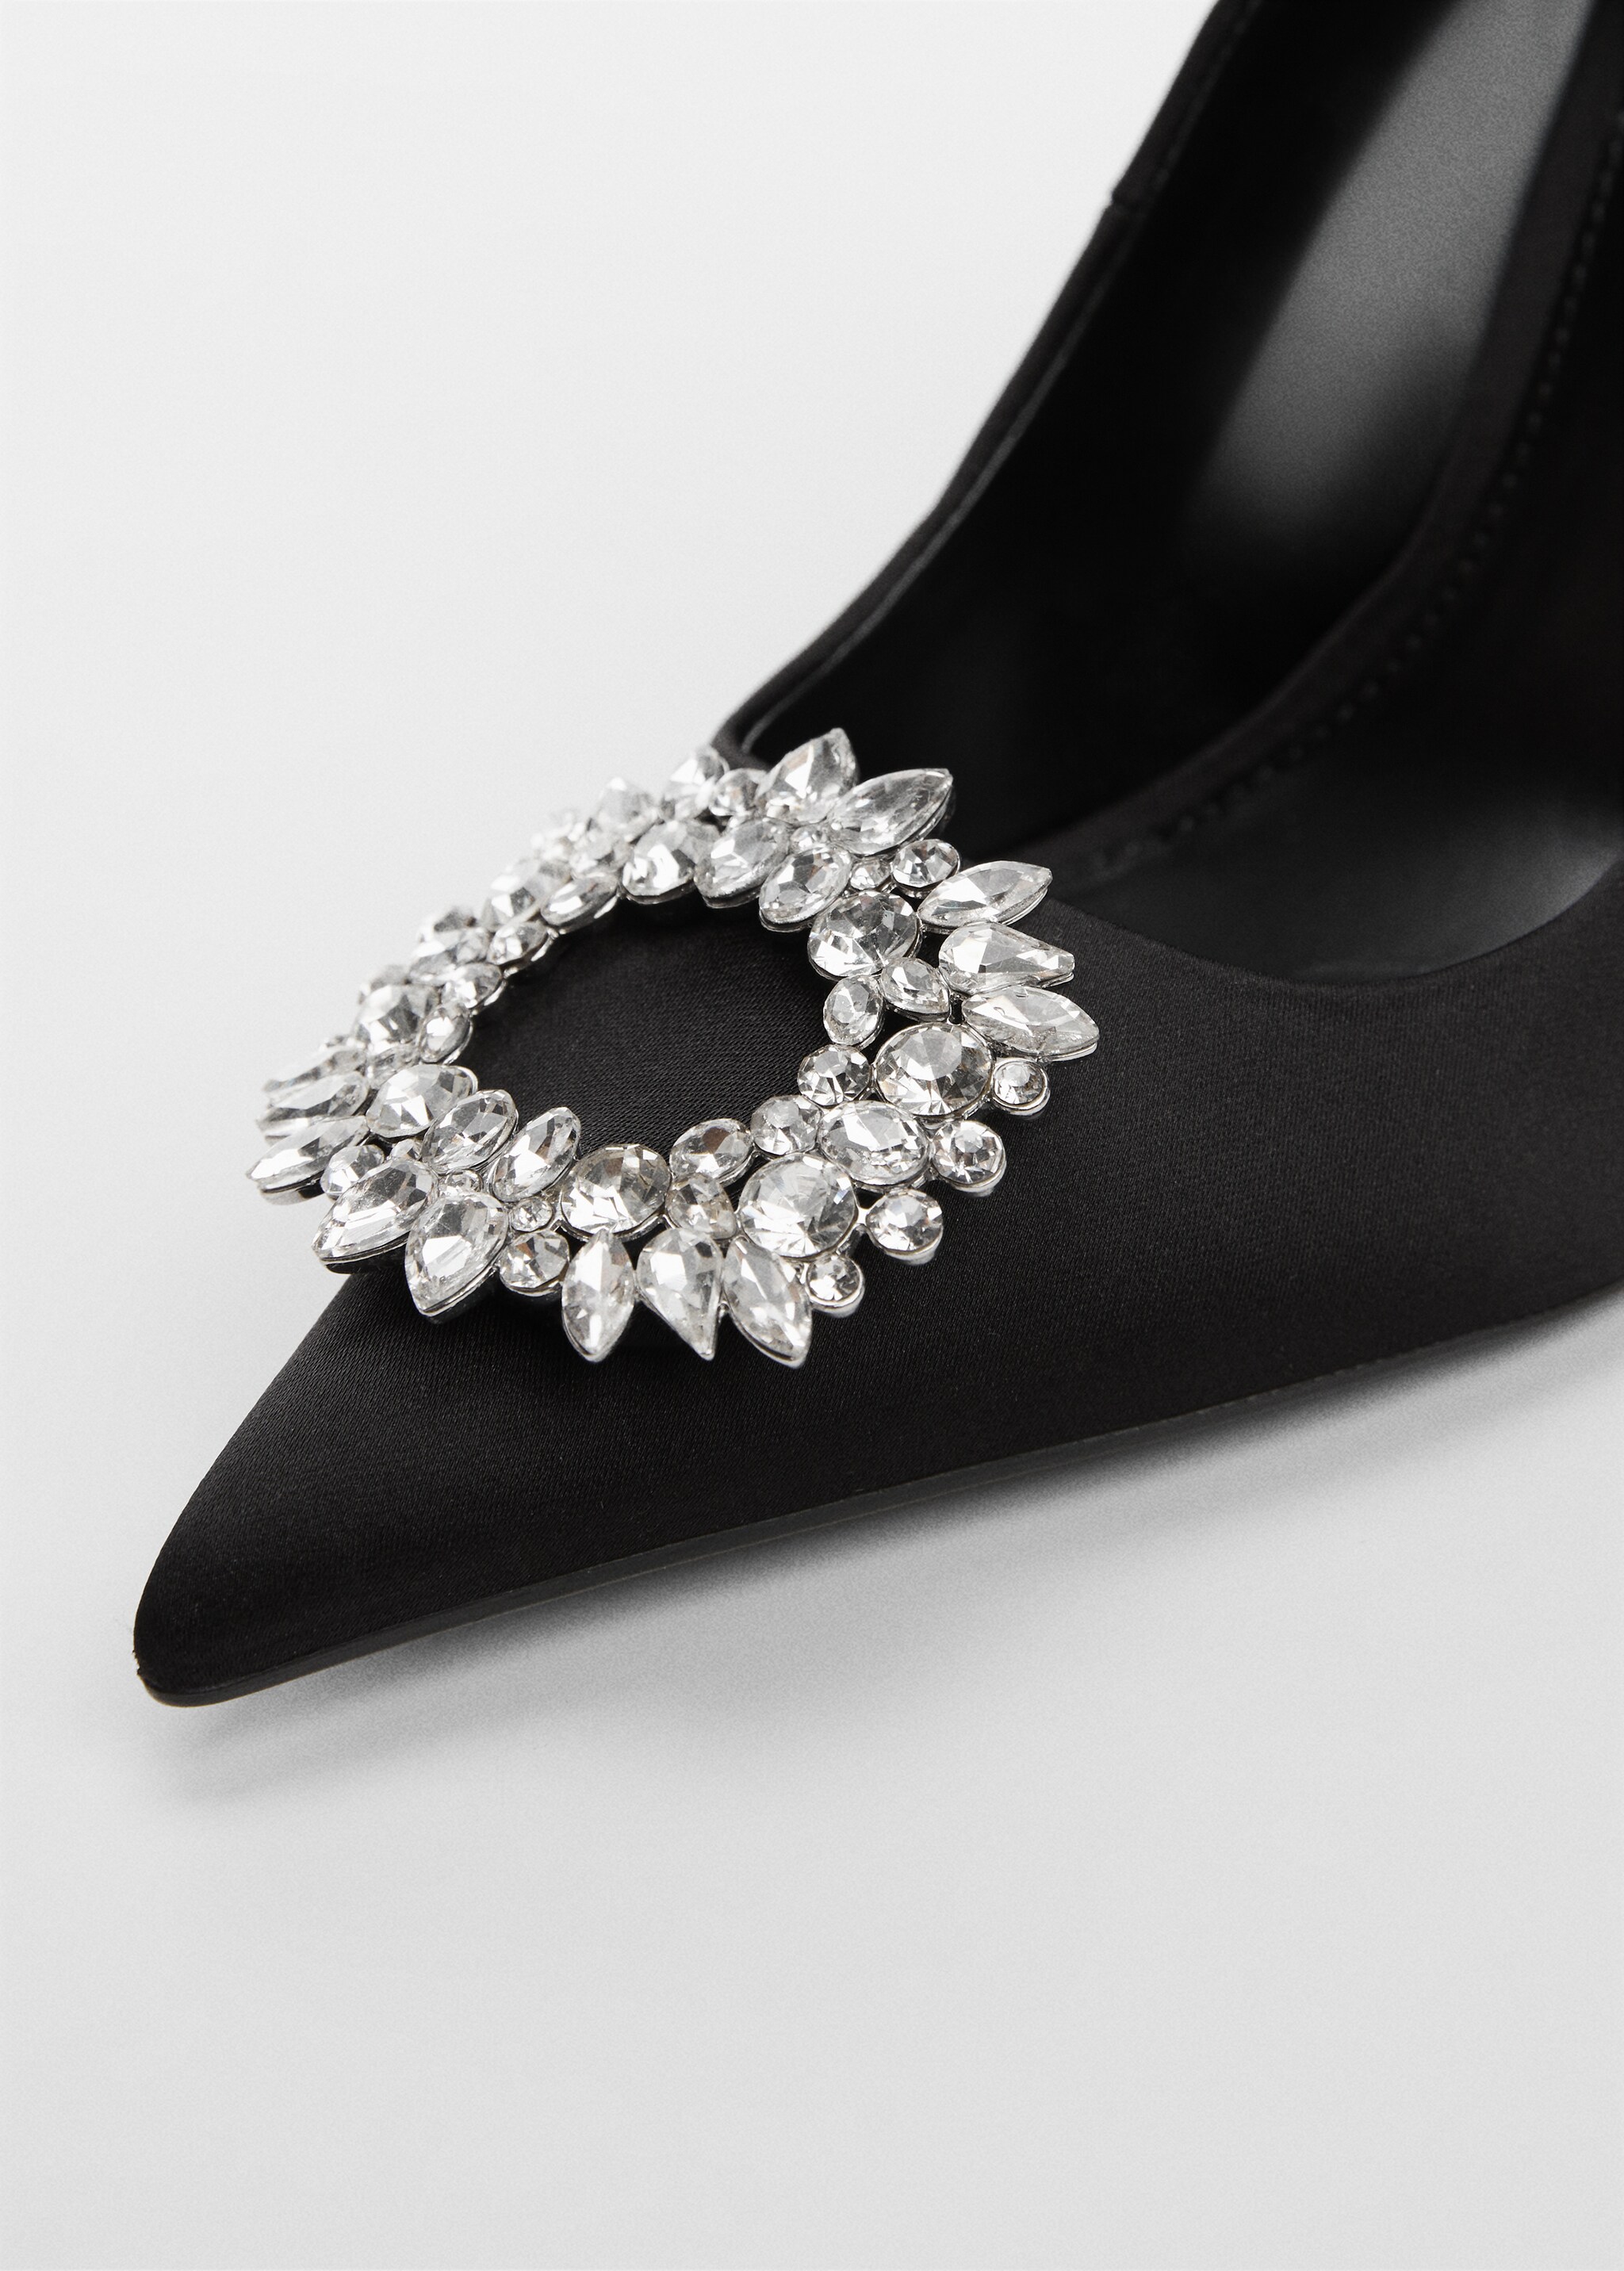 Jewel-heel shoes - Details of the article 2